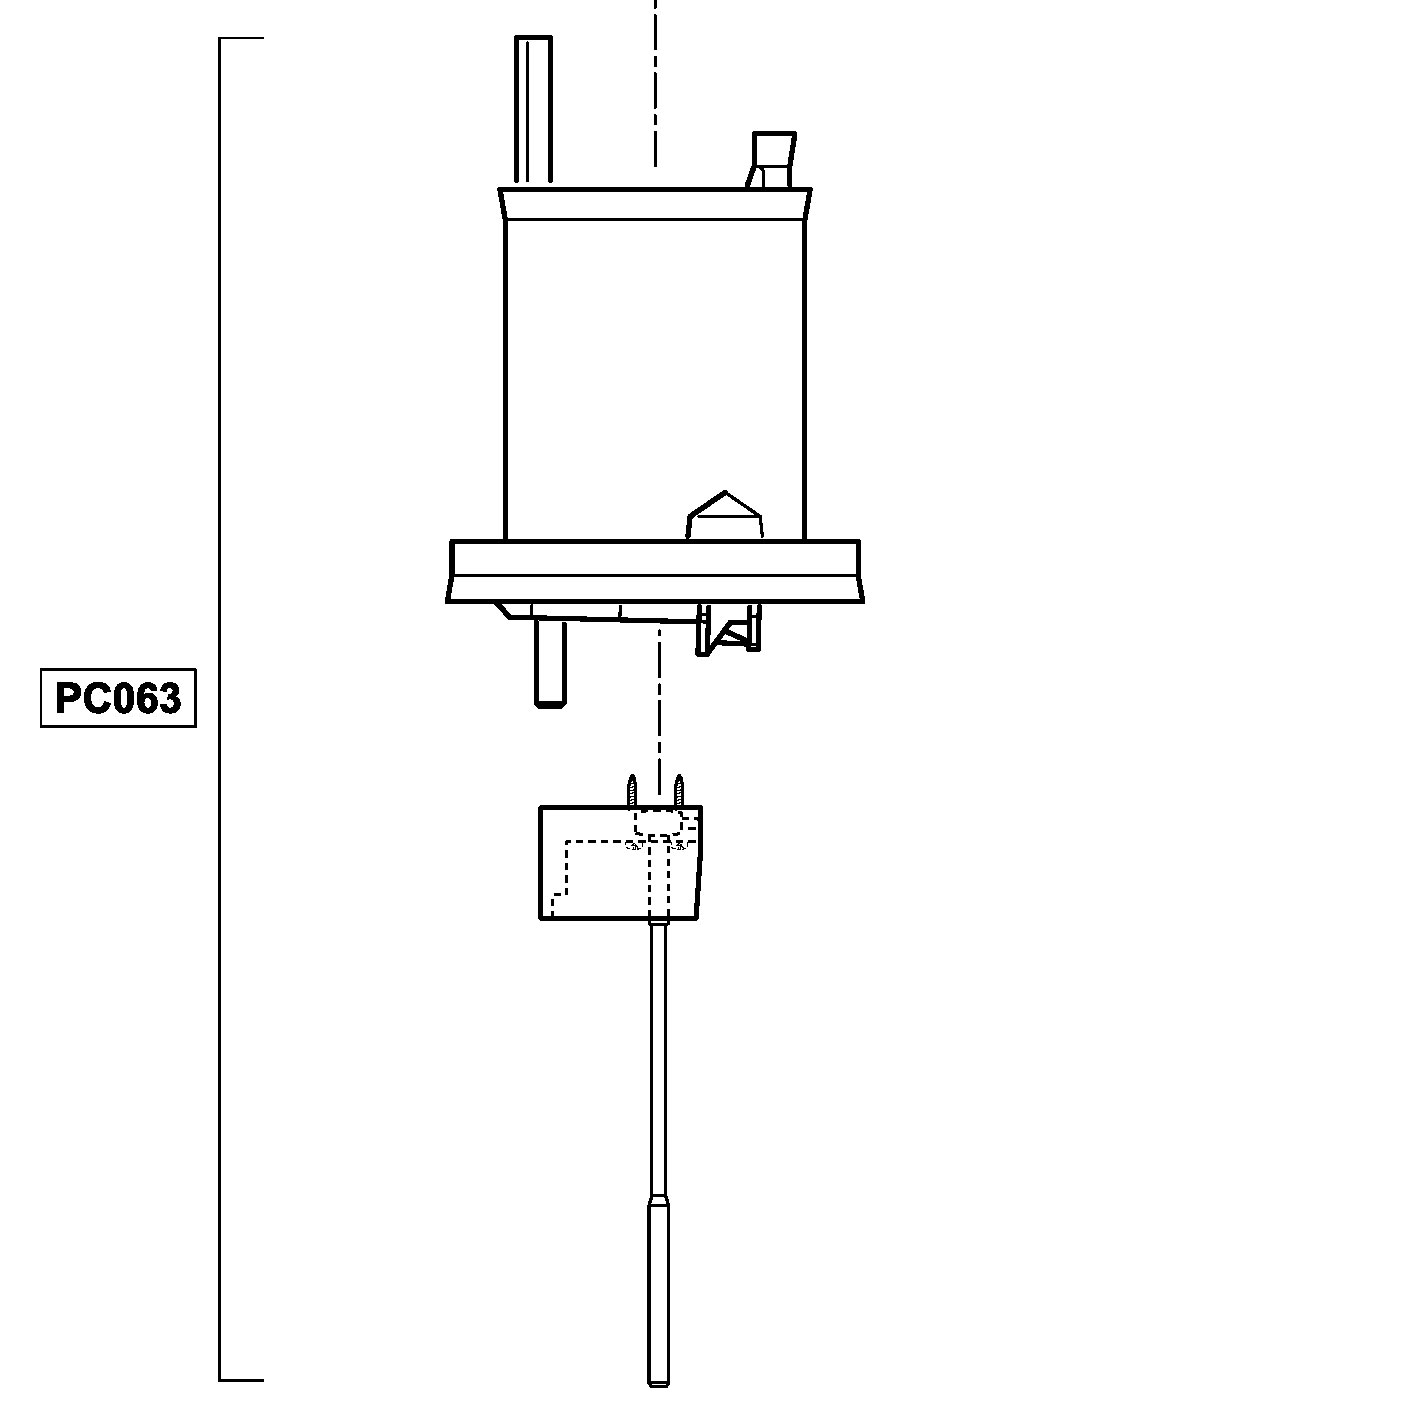 PC063VT - subassembly motor in VF for D45RE3000